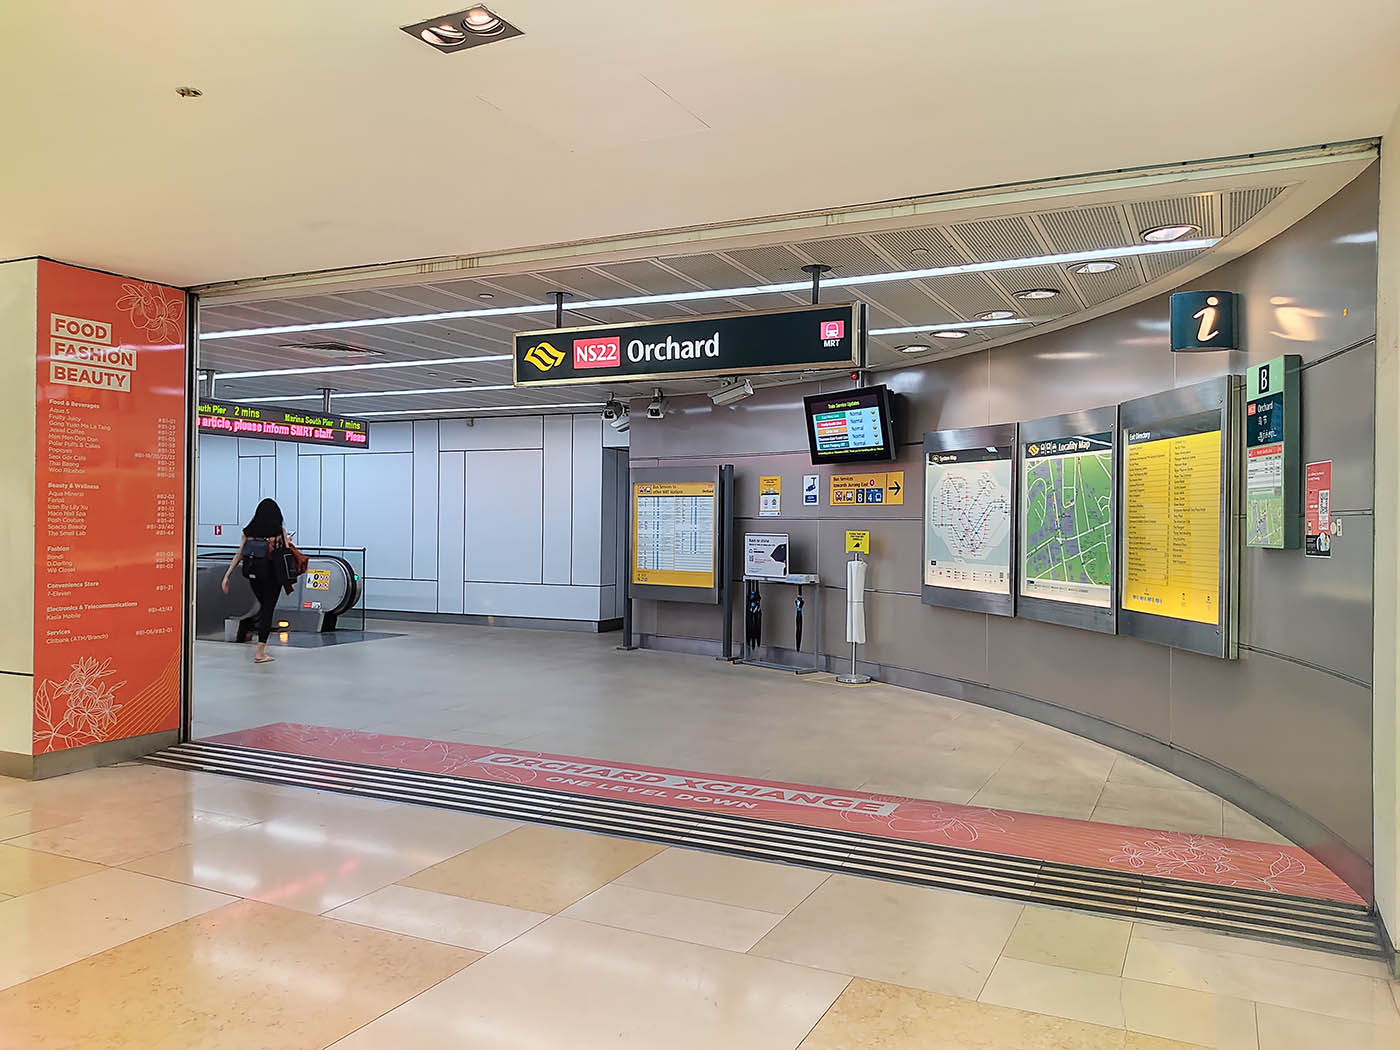 Orchard MRT Station - - Exit B